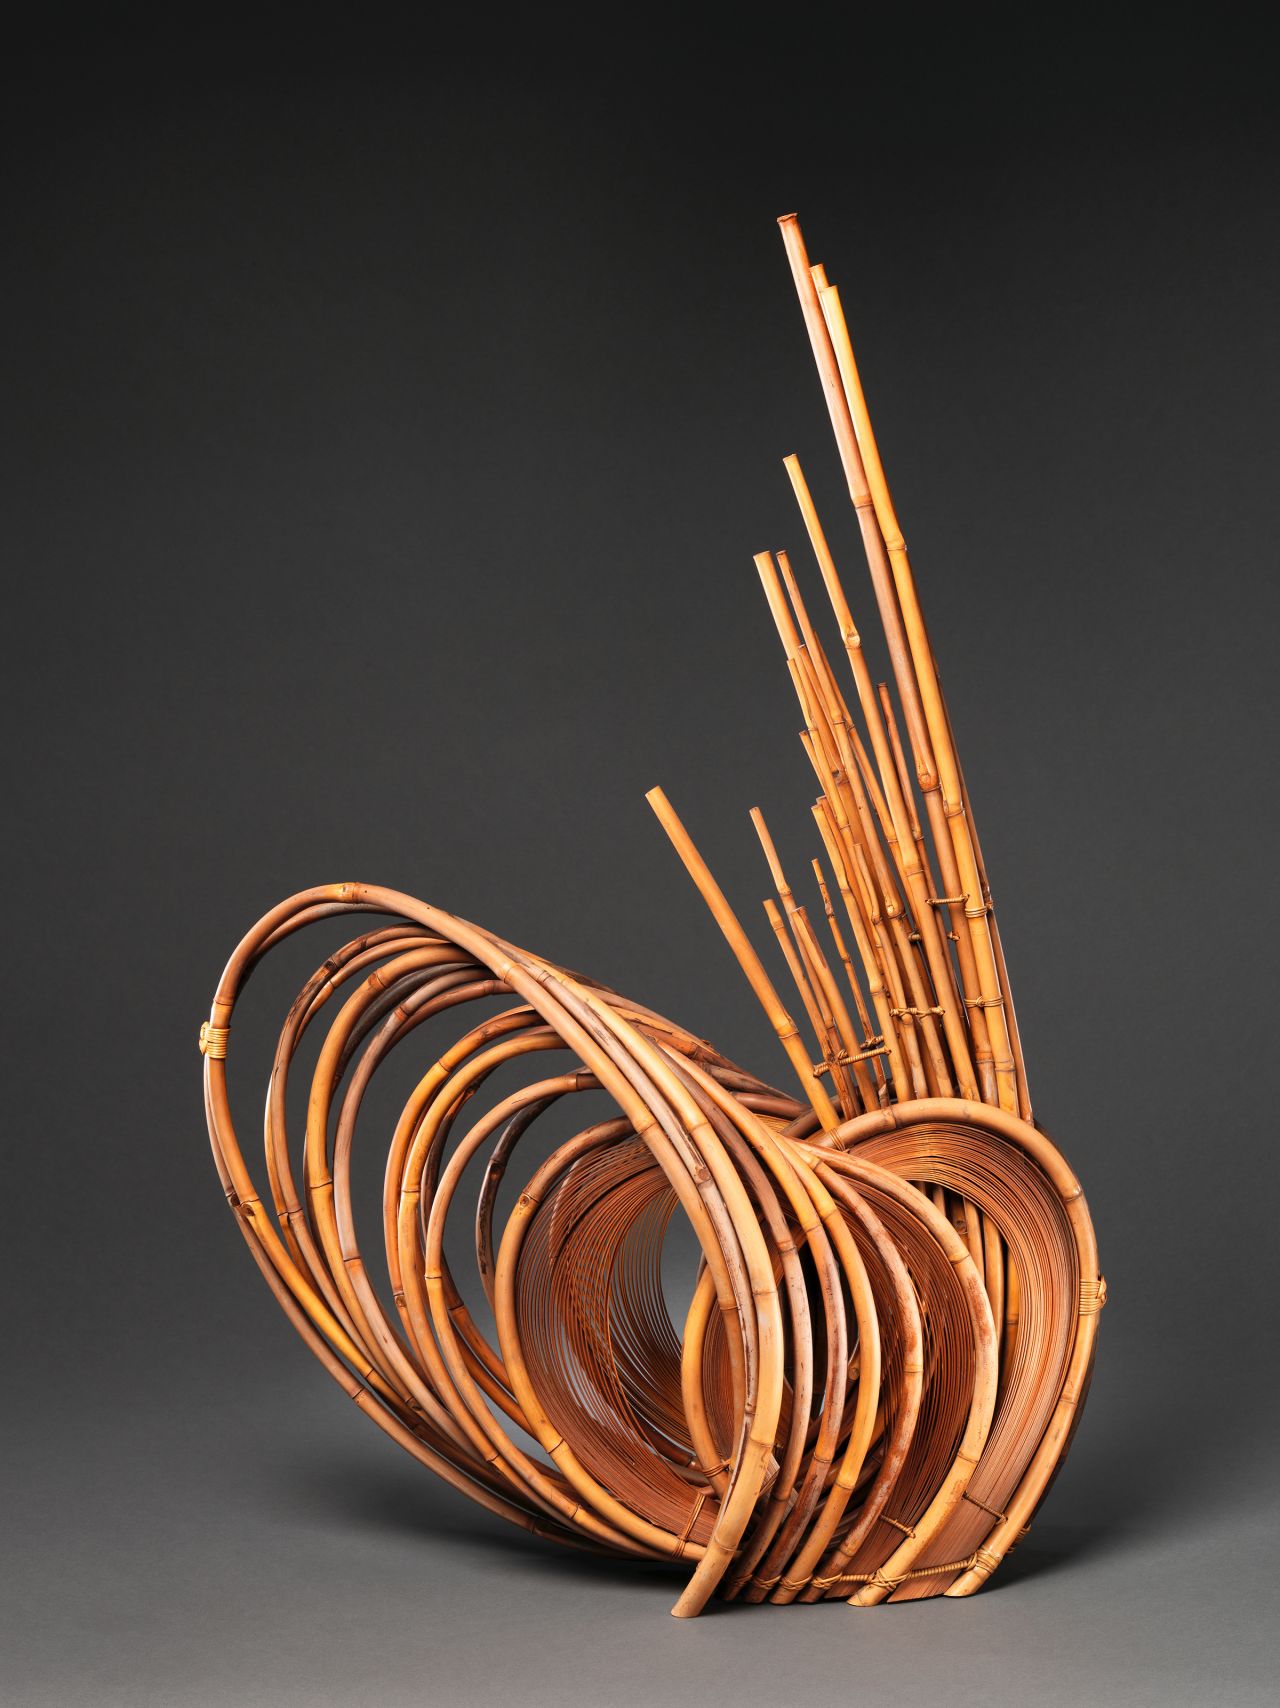 A sculptural piece made from smoked dwarf bamboo, dyed timber bamboo and rattan, a type of palm.